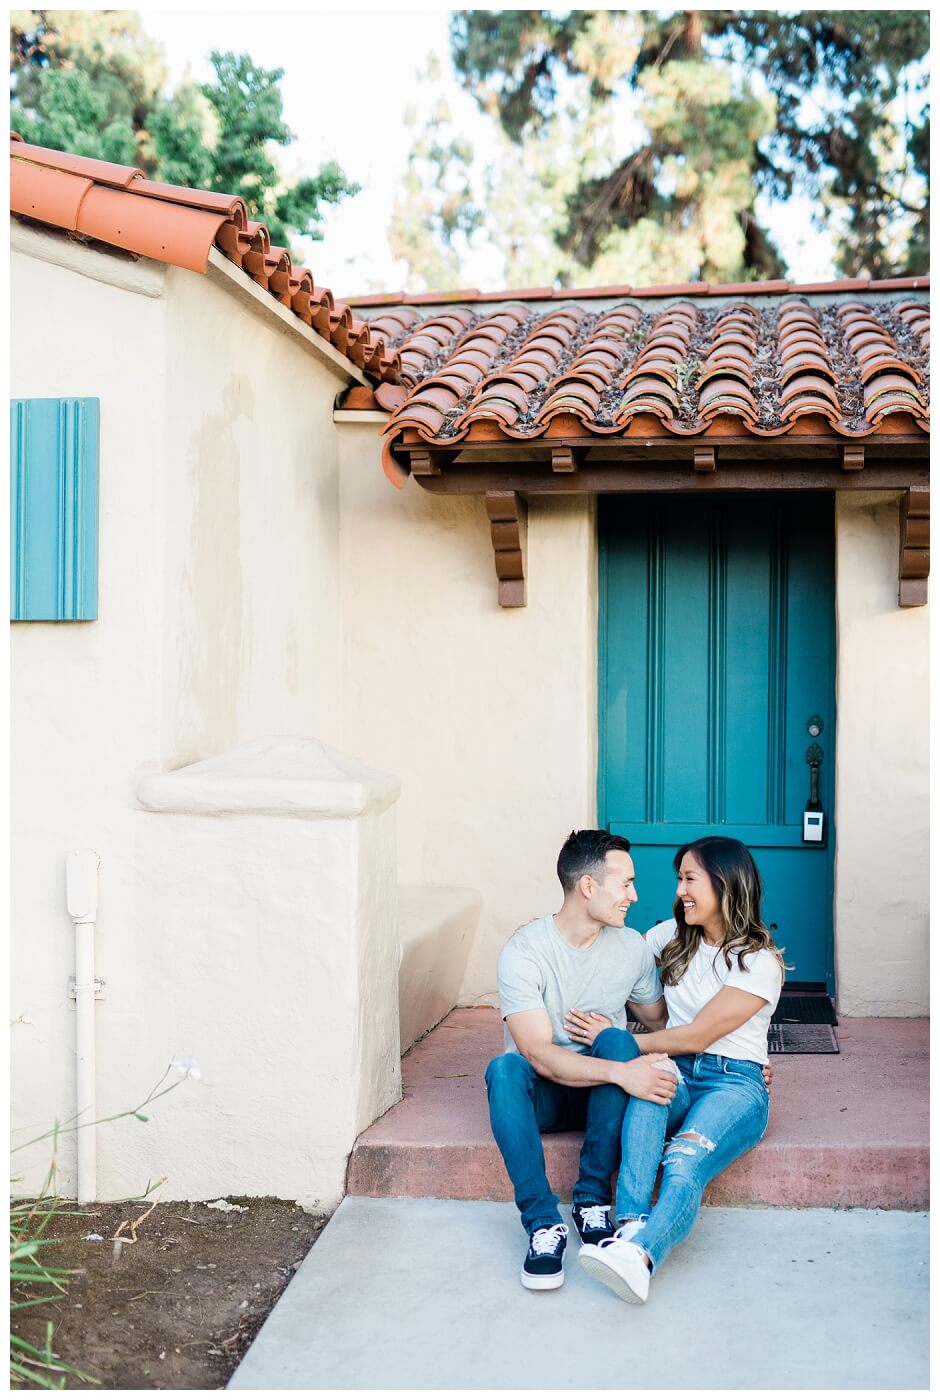 Balboa Park Engagement Photography Session in San Diego with a dog or puppy